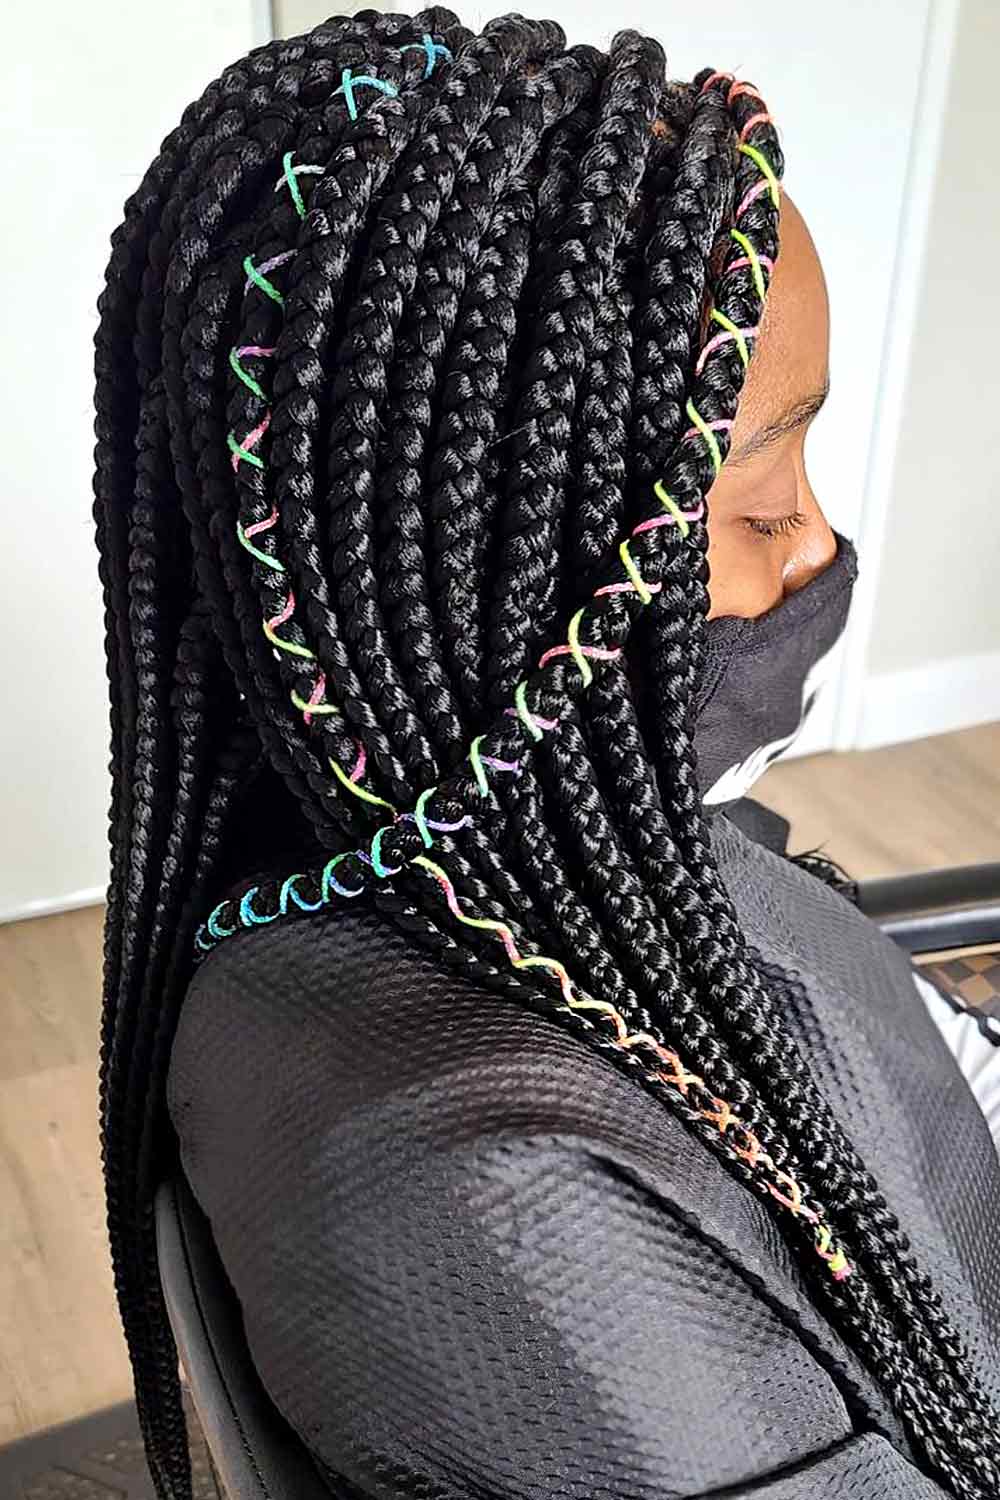 Rubber Band Hairstyles with Box Braids #rubberbandhairstyles #naturalhairstyles #kidshairstyles